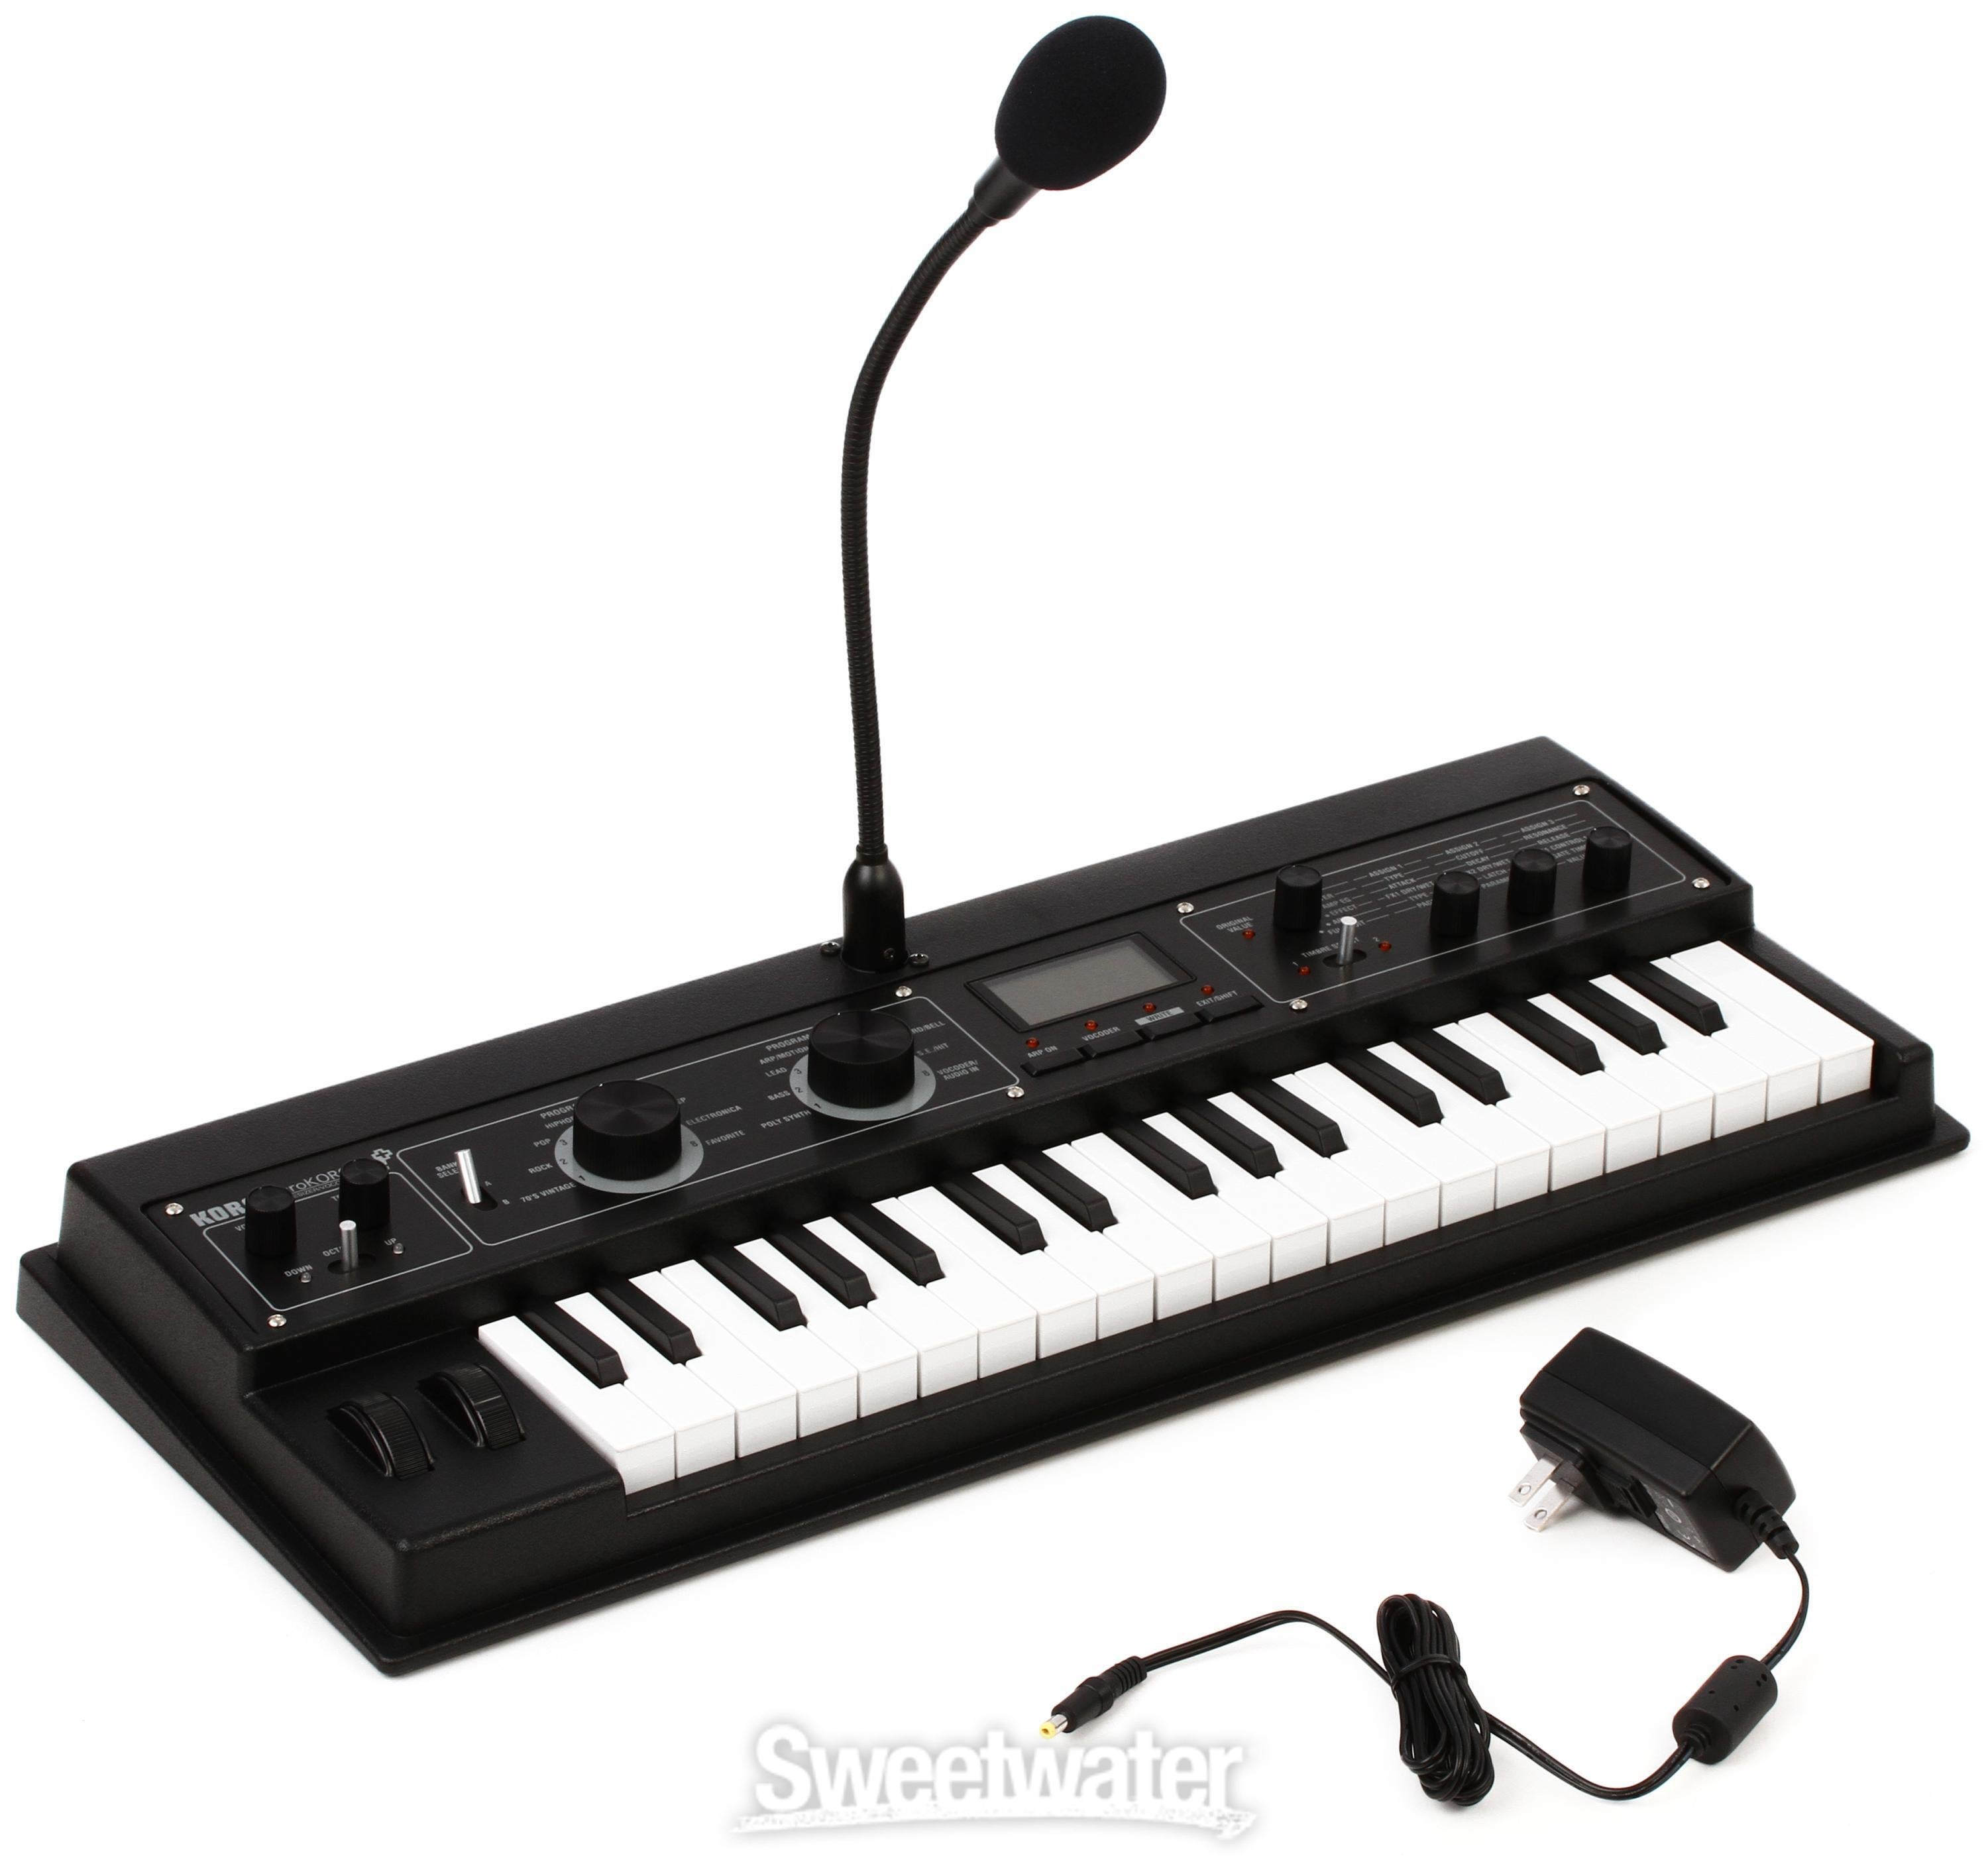 Korg microKORG XL+ Synthesizer with Vocoder | Sweetwater